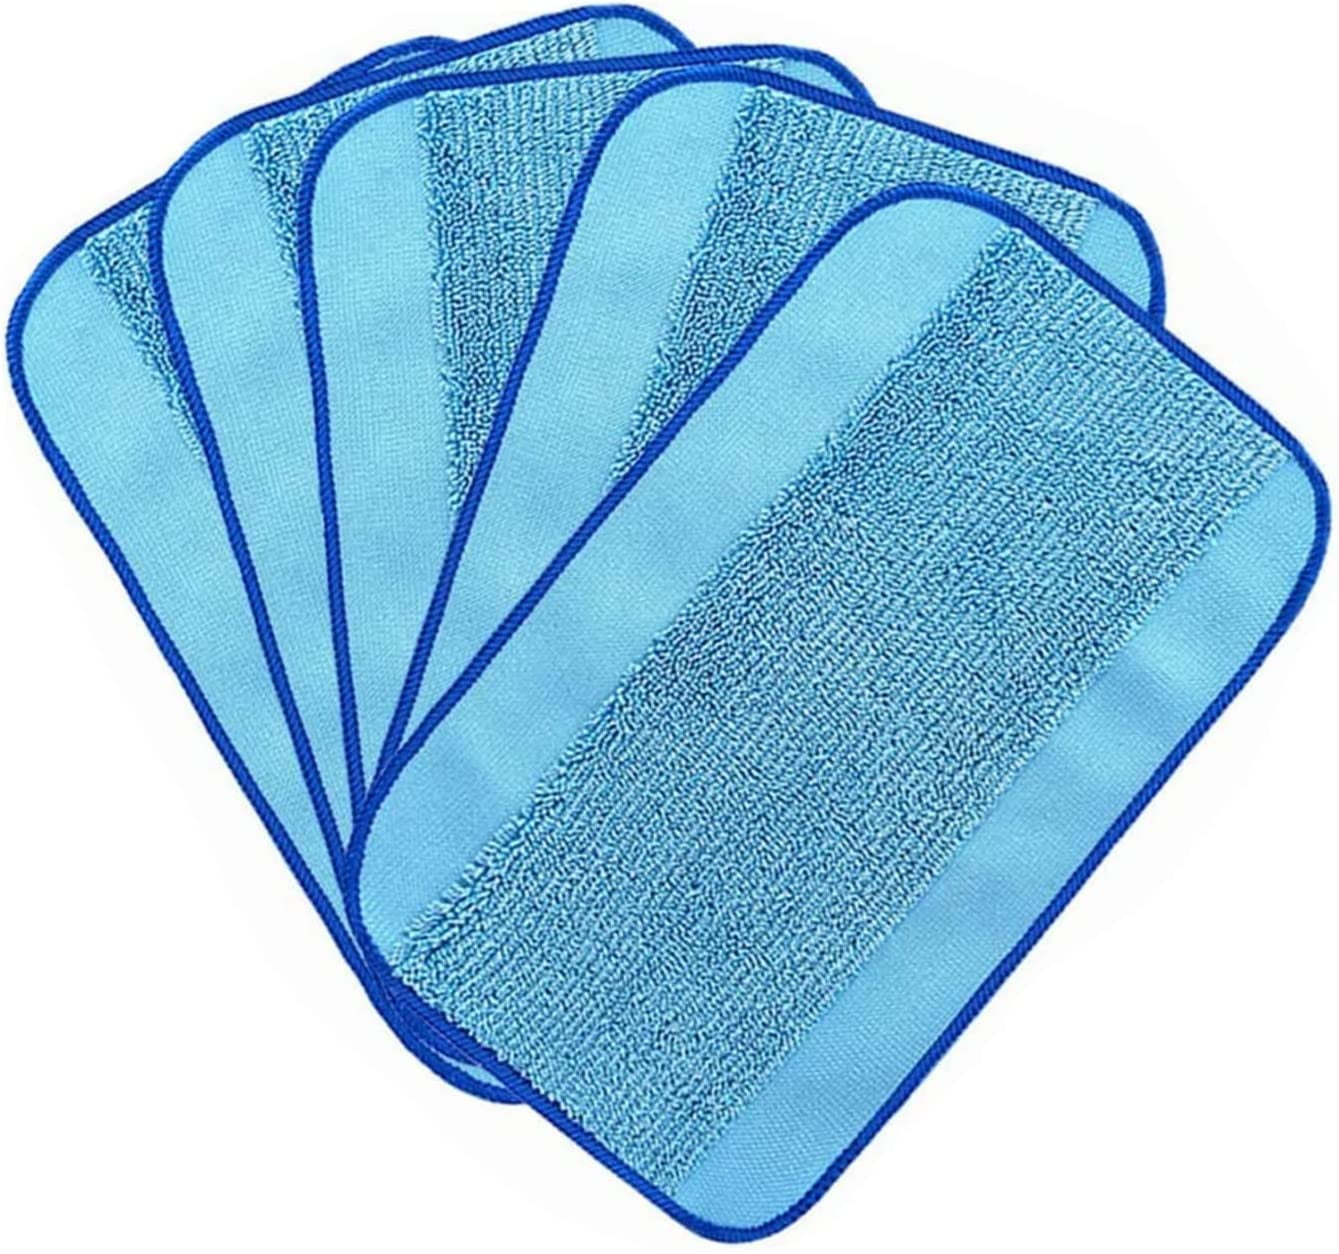  iRobot Braava Authentic Replacement Parts - Braava 300 Series  Microfiber Pro-Clean Mopping Cloths for Braava Floor Robot Mop (3-Pack) -  Vacuum Parts And Accessories